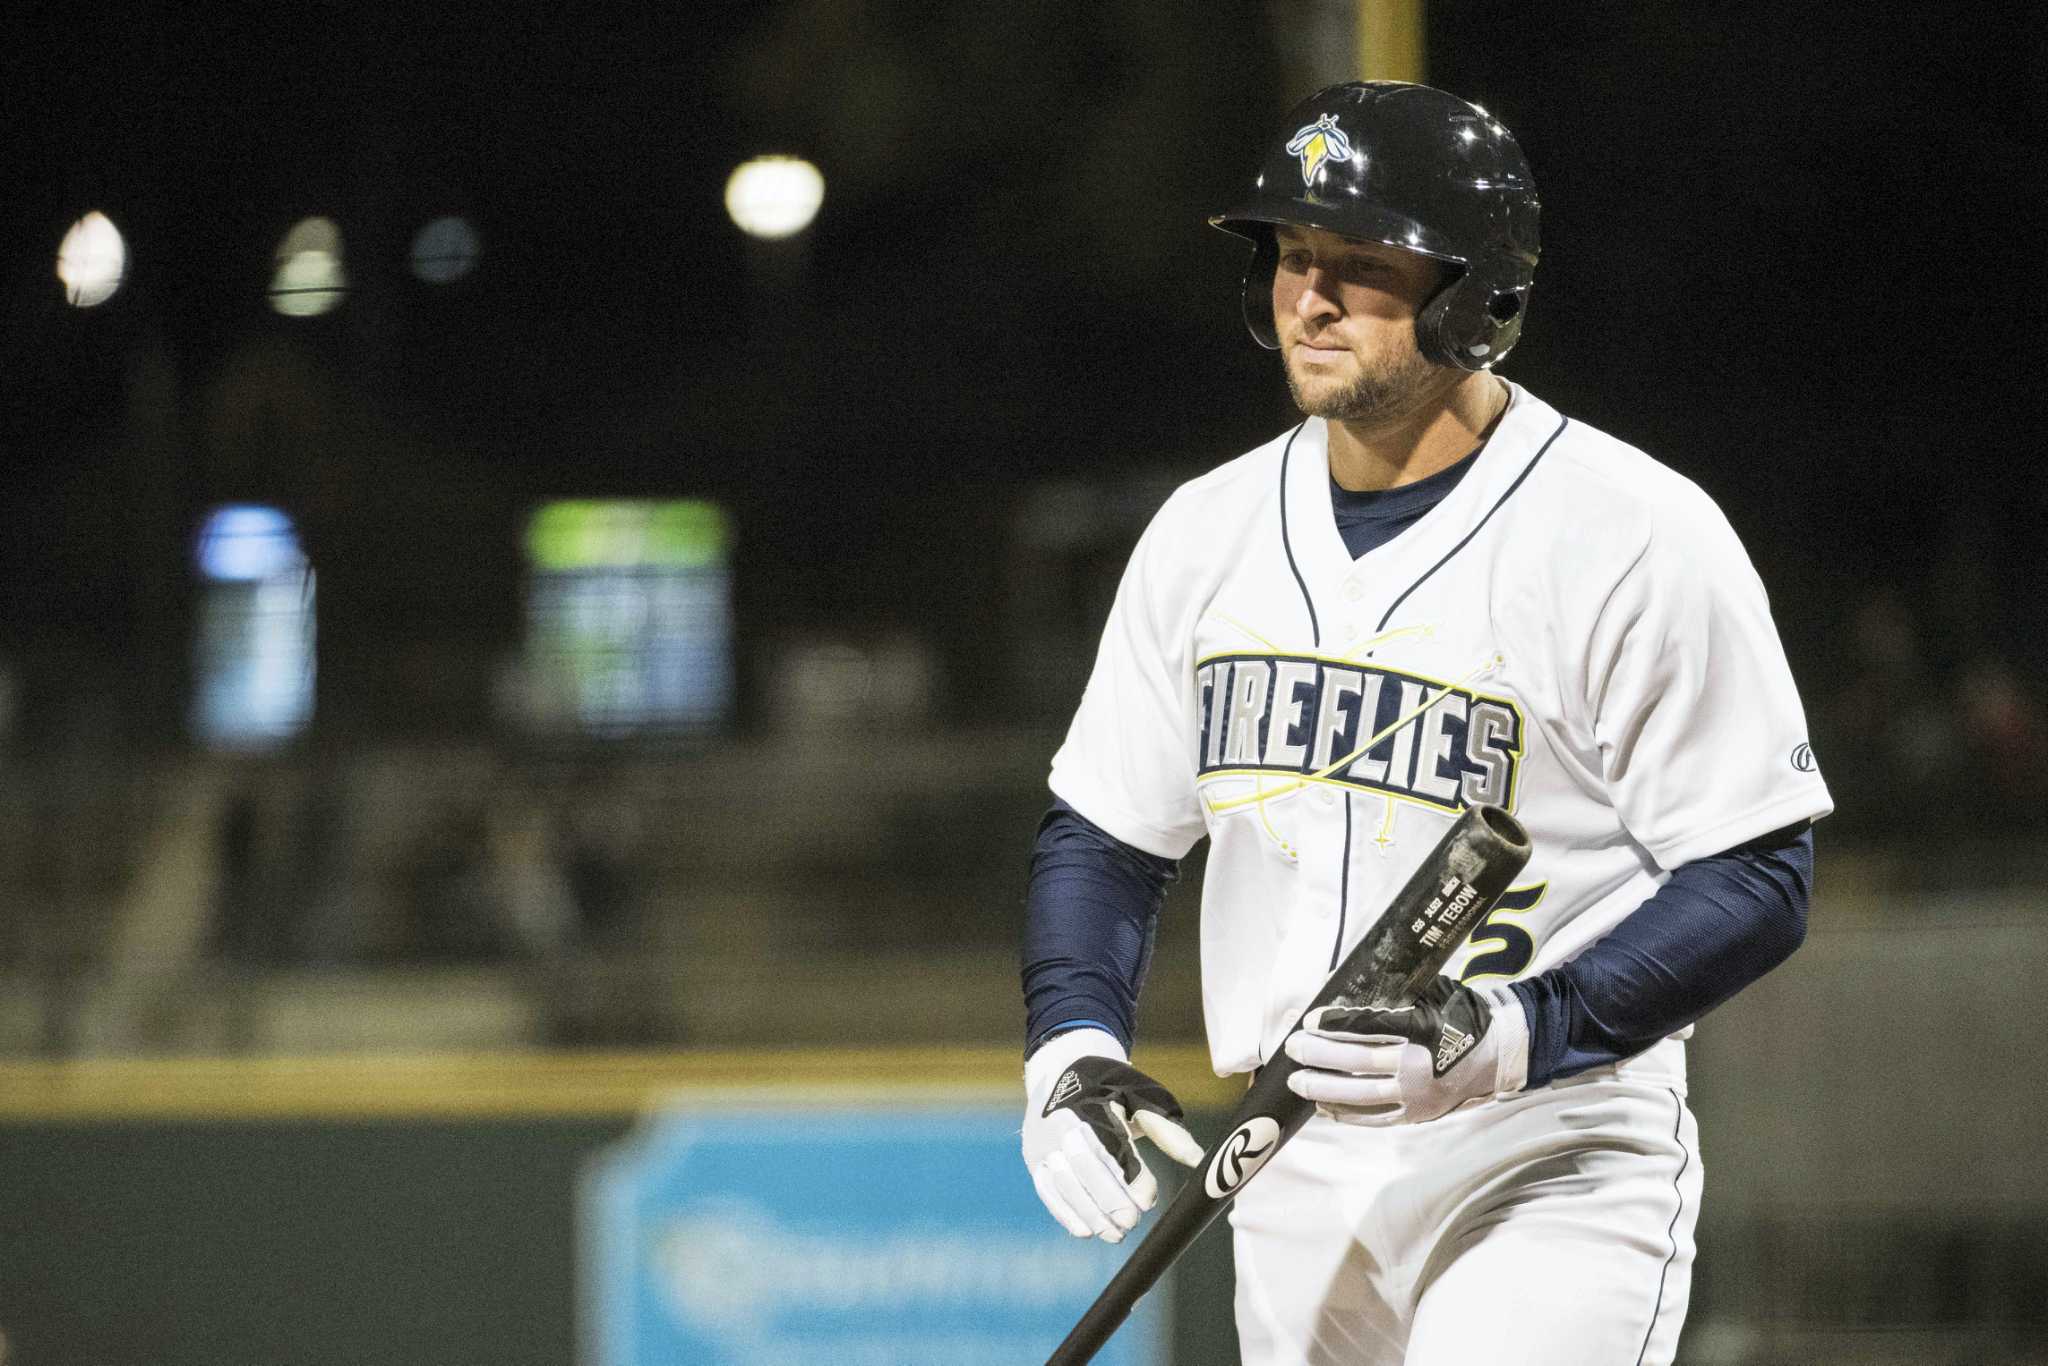 Tebow assigned to Mets' Class-A affiliate in Columbia, S.C.